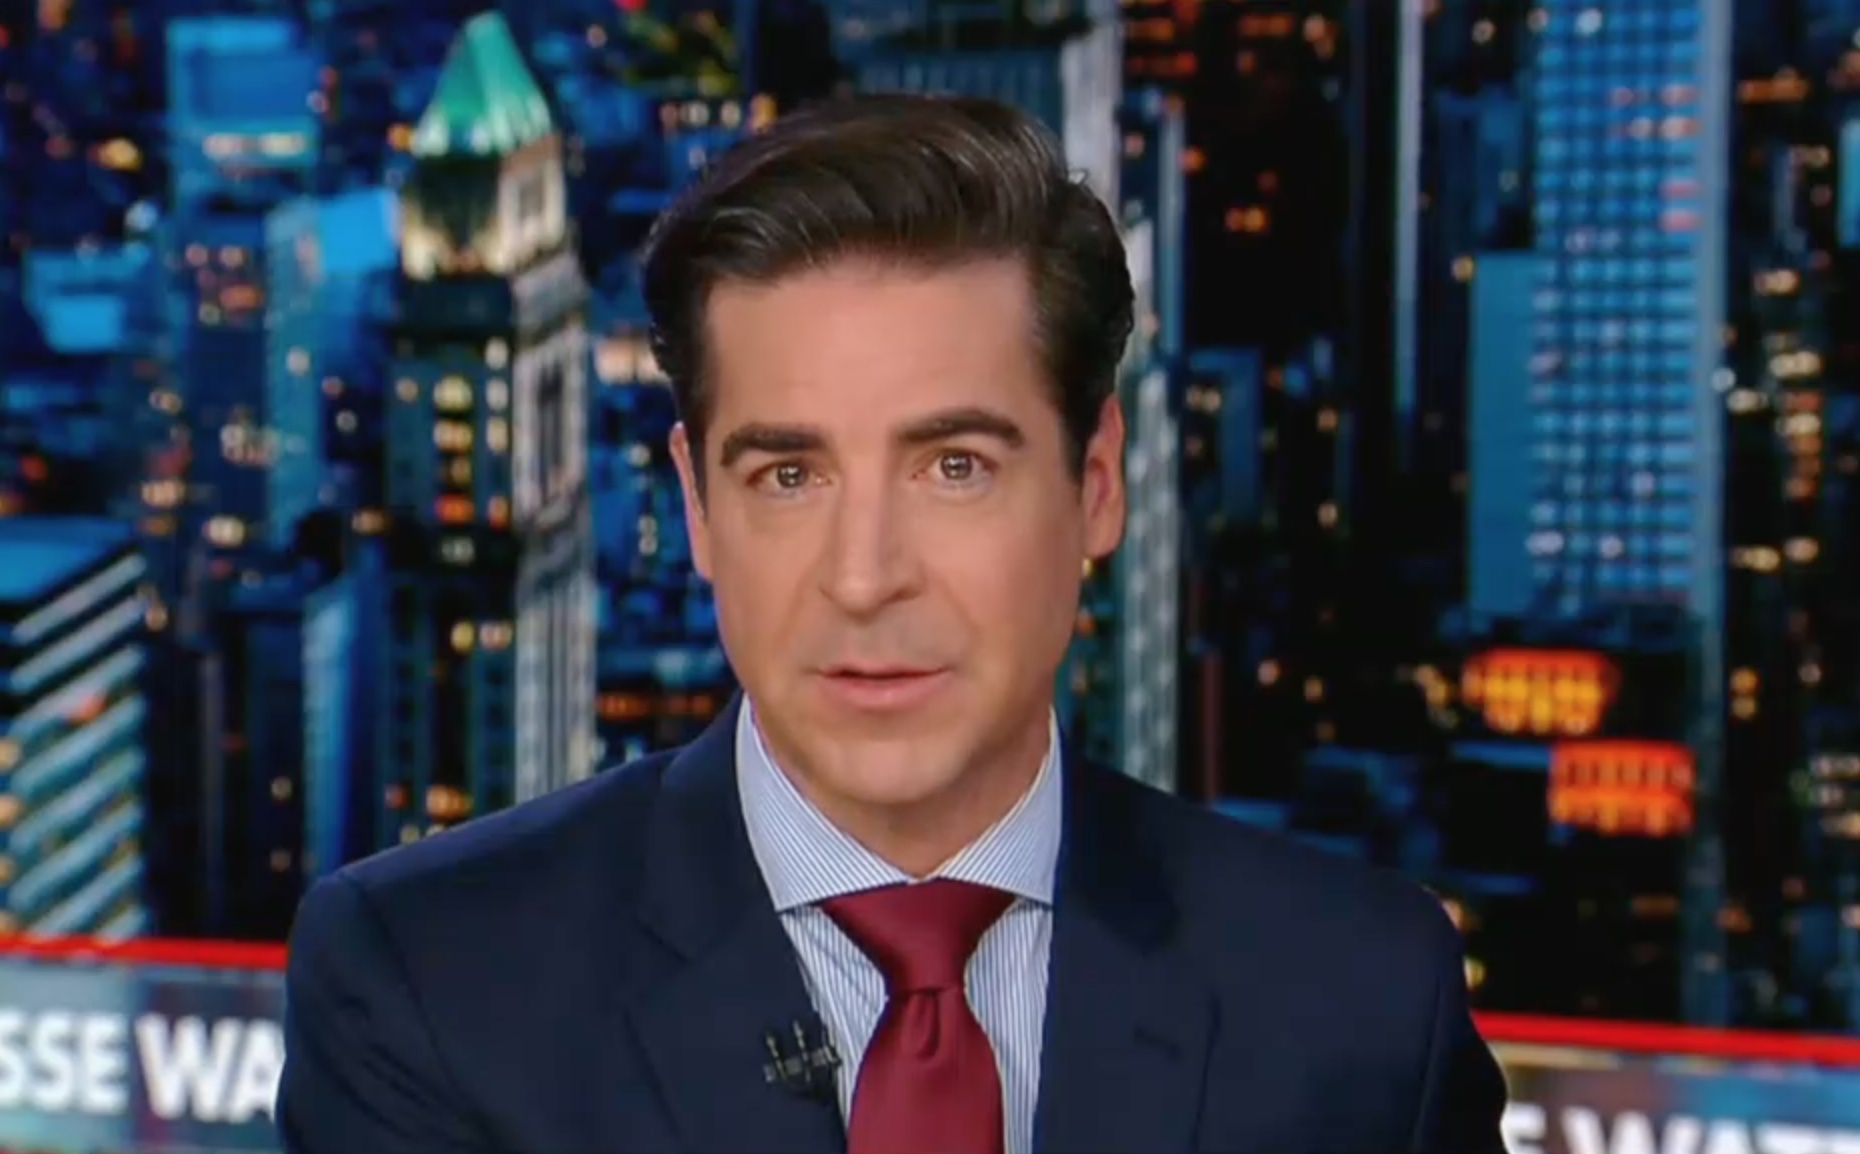 Jesse Watters’s Second Book Hits #1 On New York Times Best-Seller List